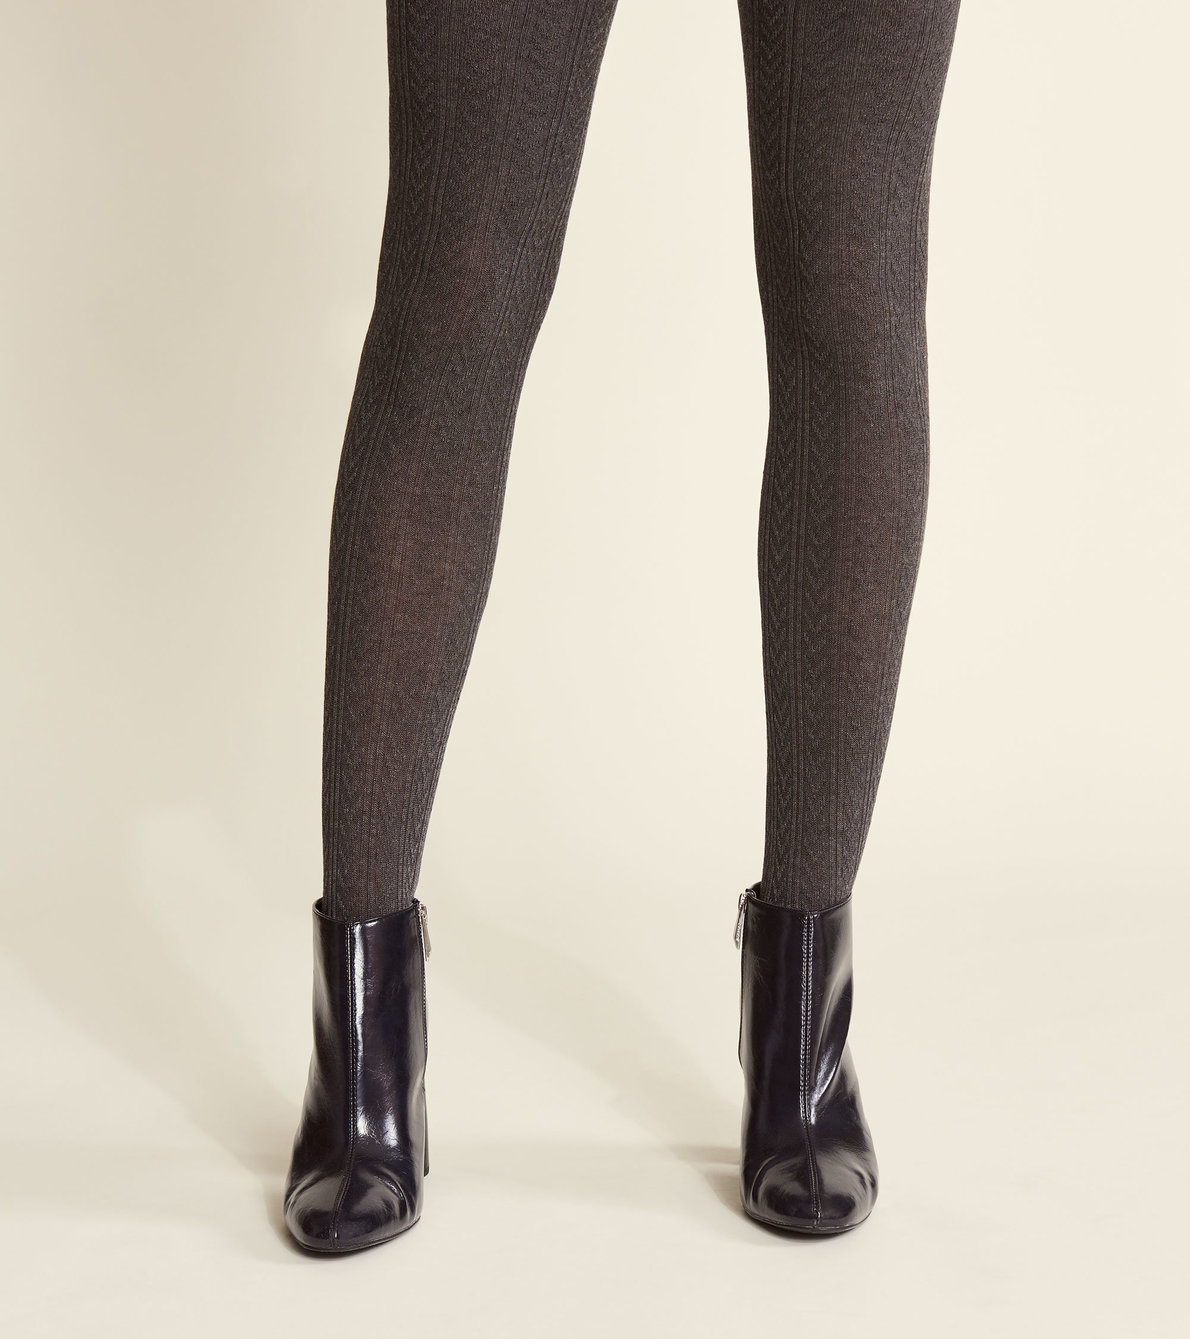 View larger image of Cable Knit Tights - Charcoal Melange